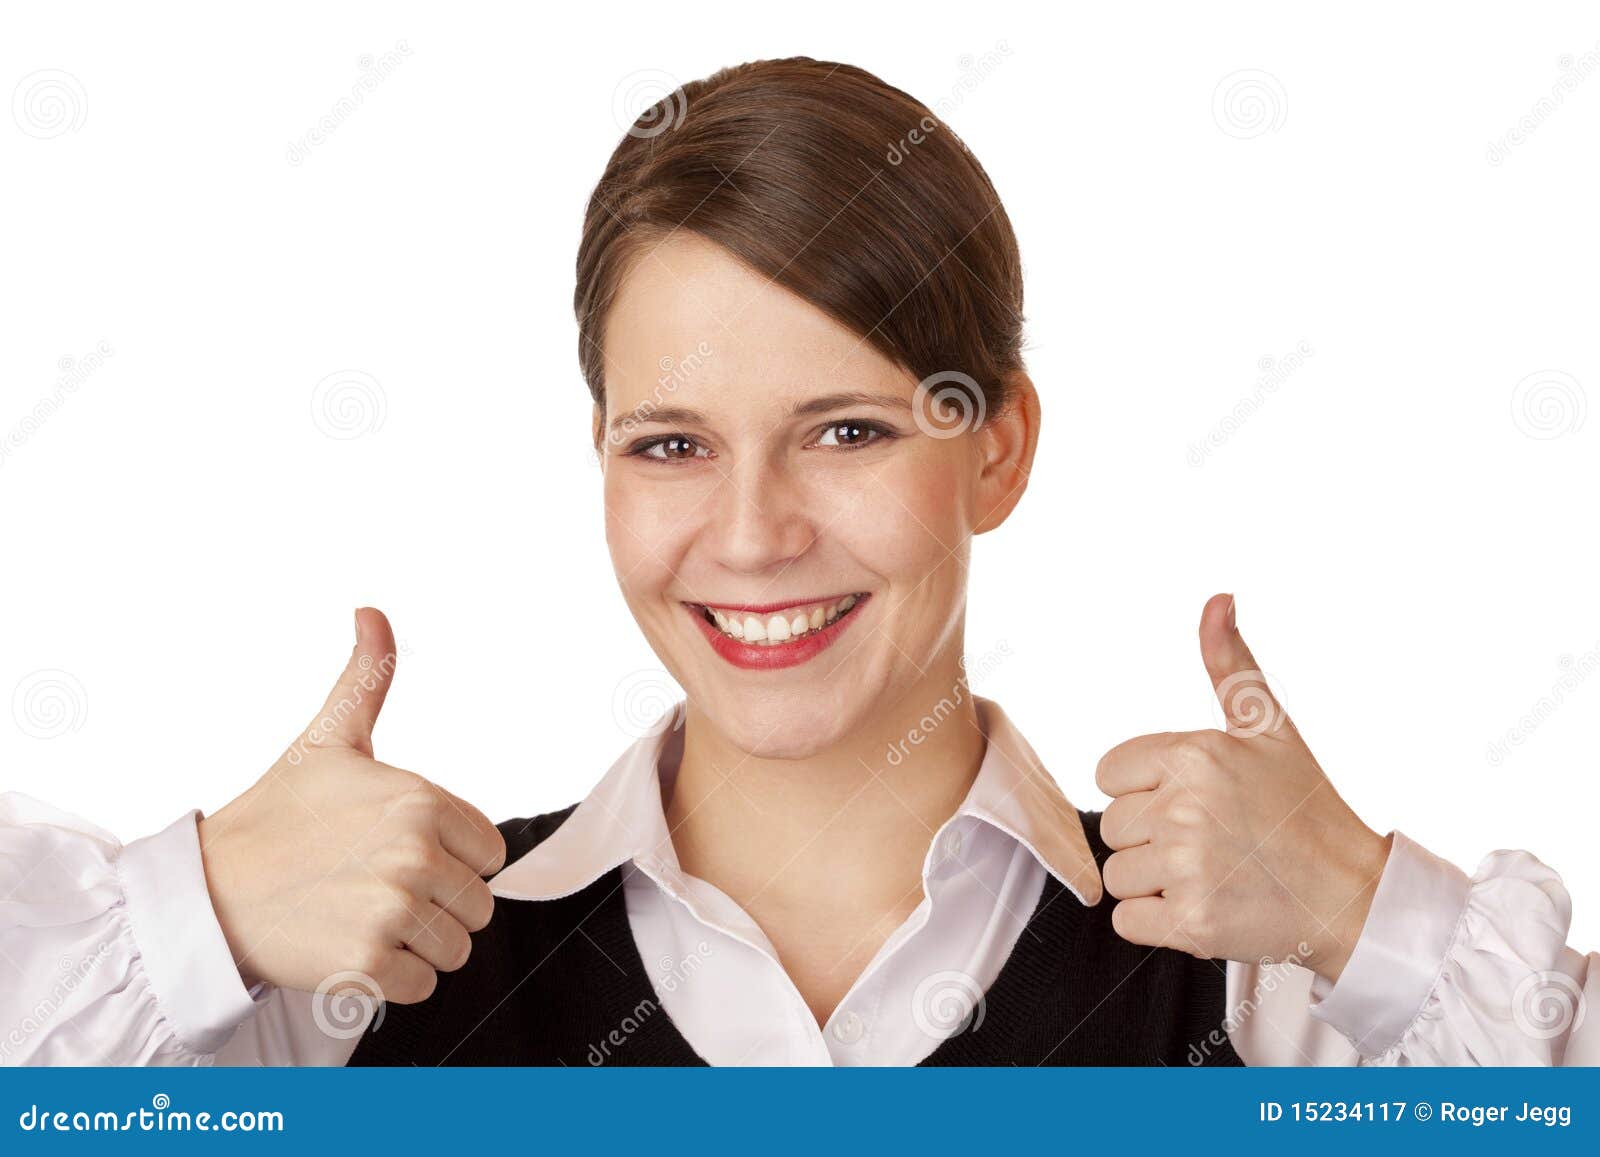 Attractive Businesswoman Shows Both Thumbs Up Stock Image Image Of